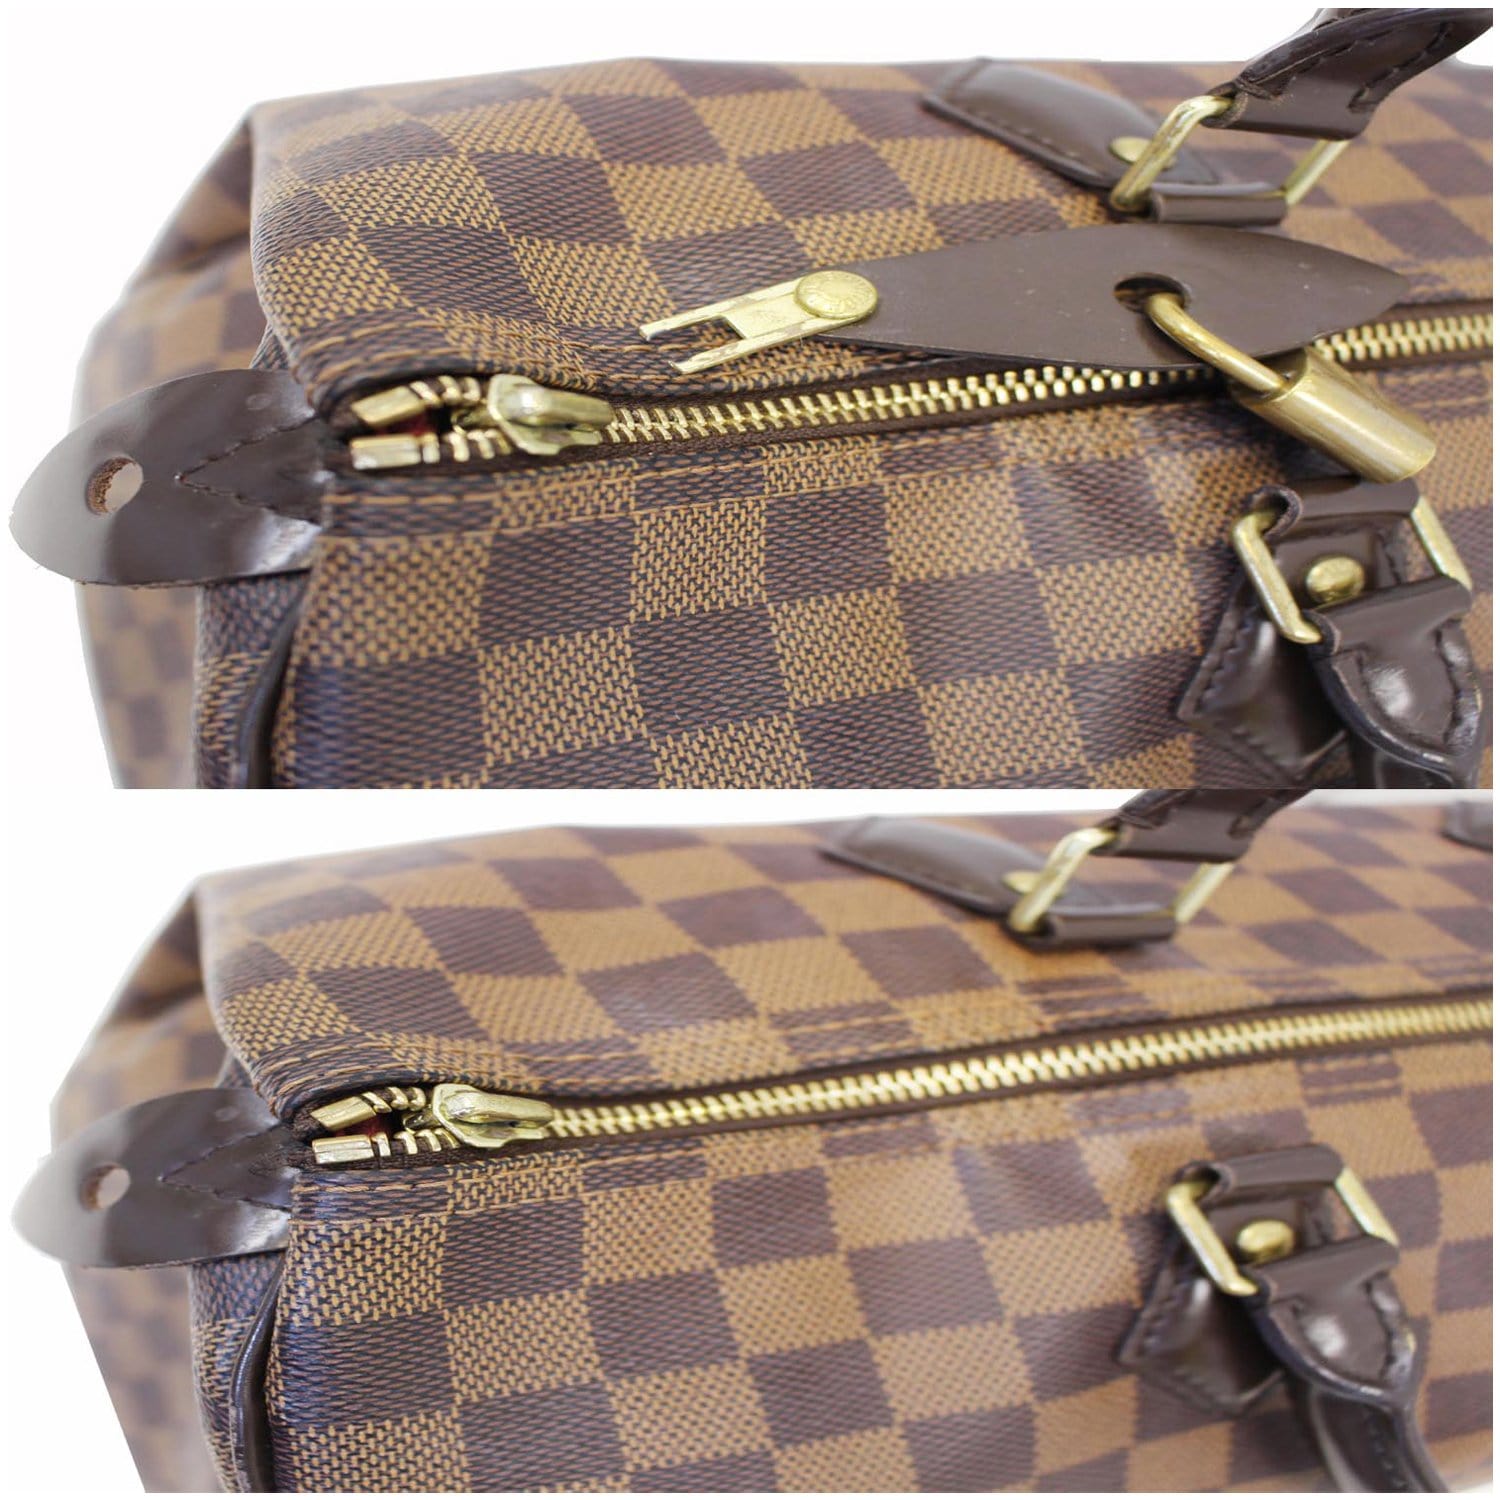 Speedy B 35 just arrived - she's made in France 💪🏻 : r/Louisvuitton